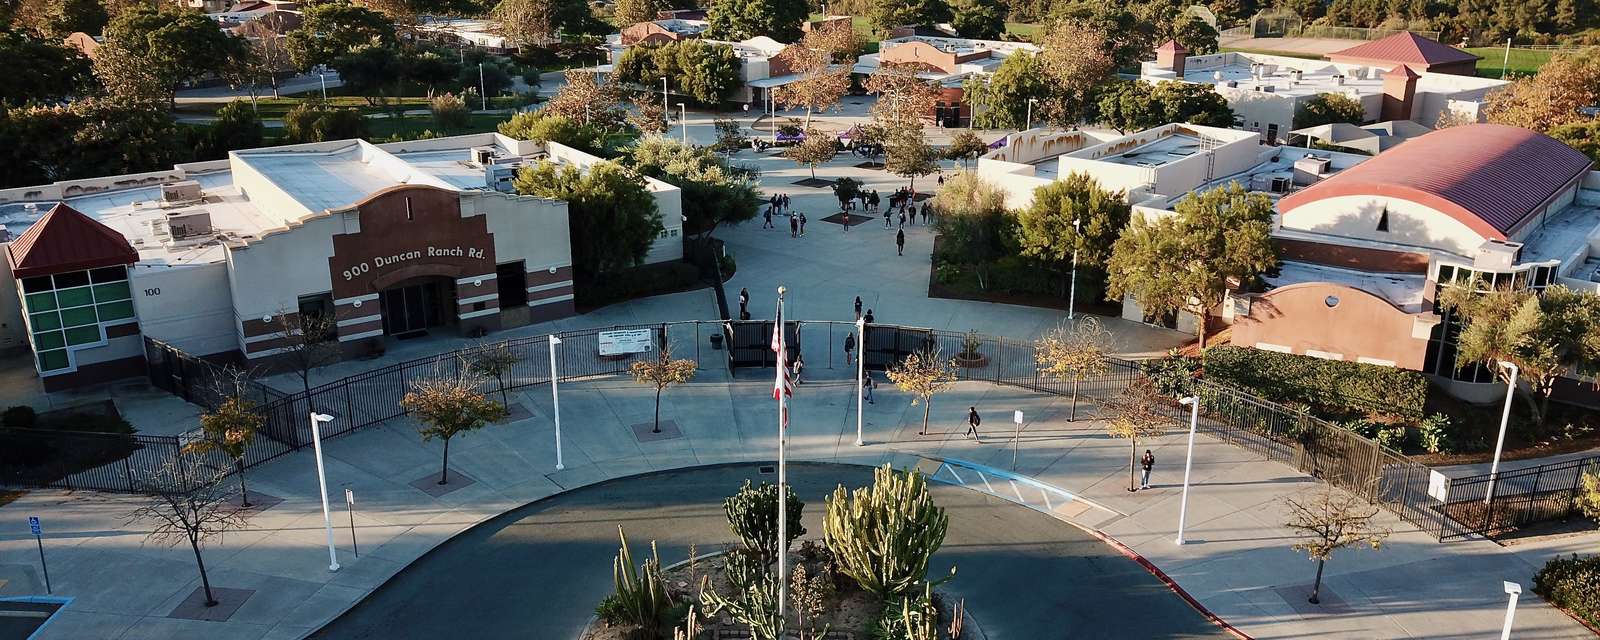 Drone Photo of the font of Eastlake Middle School